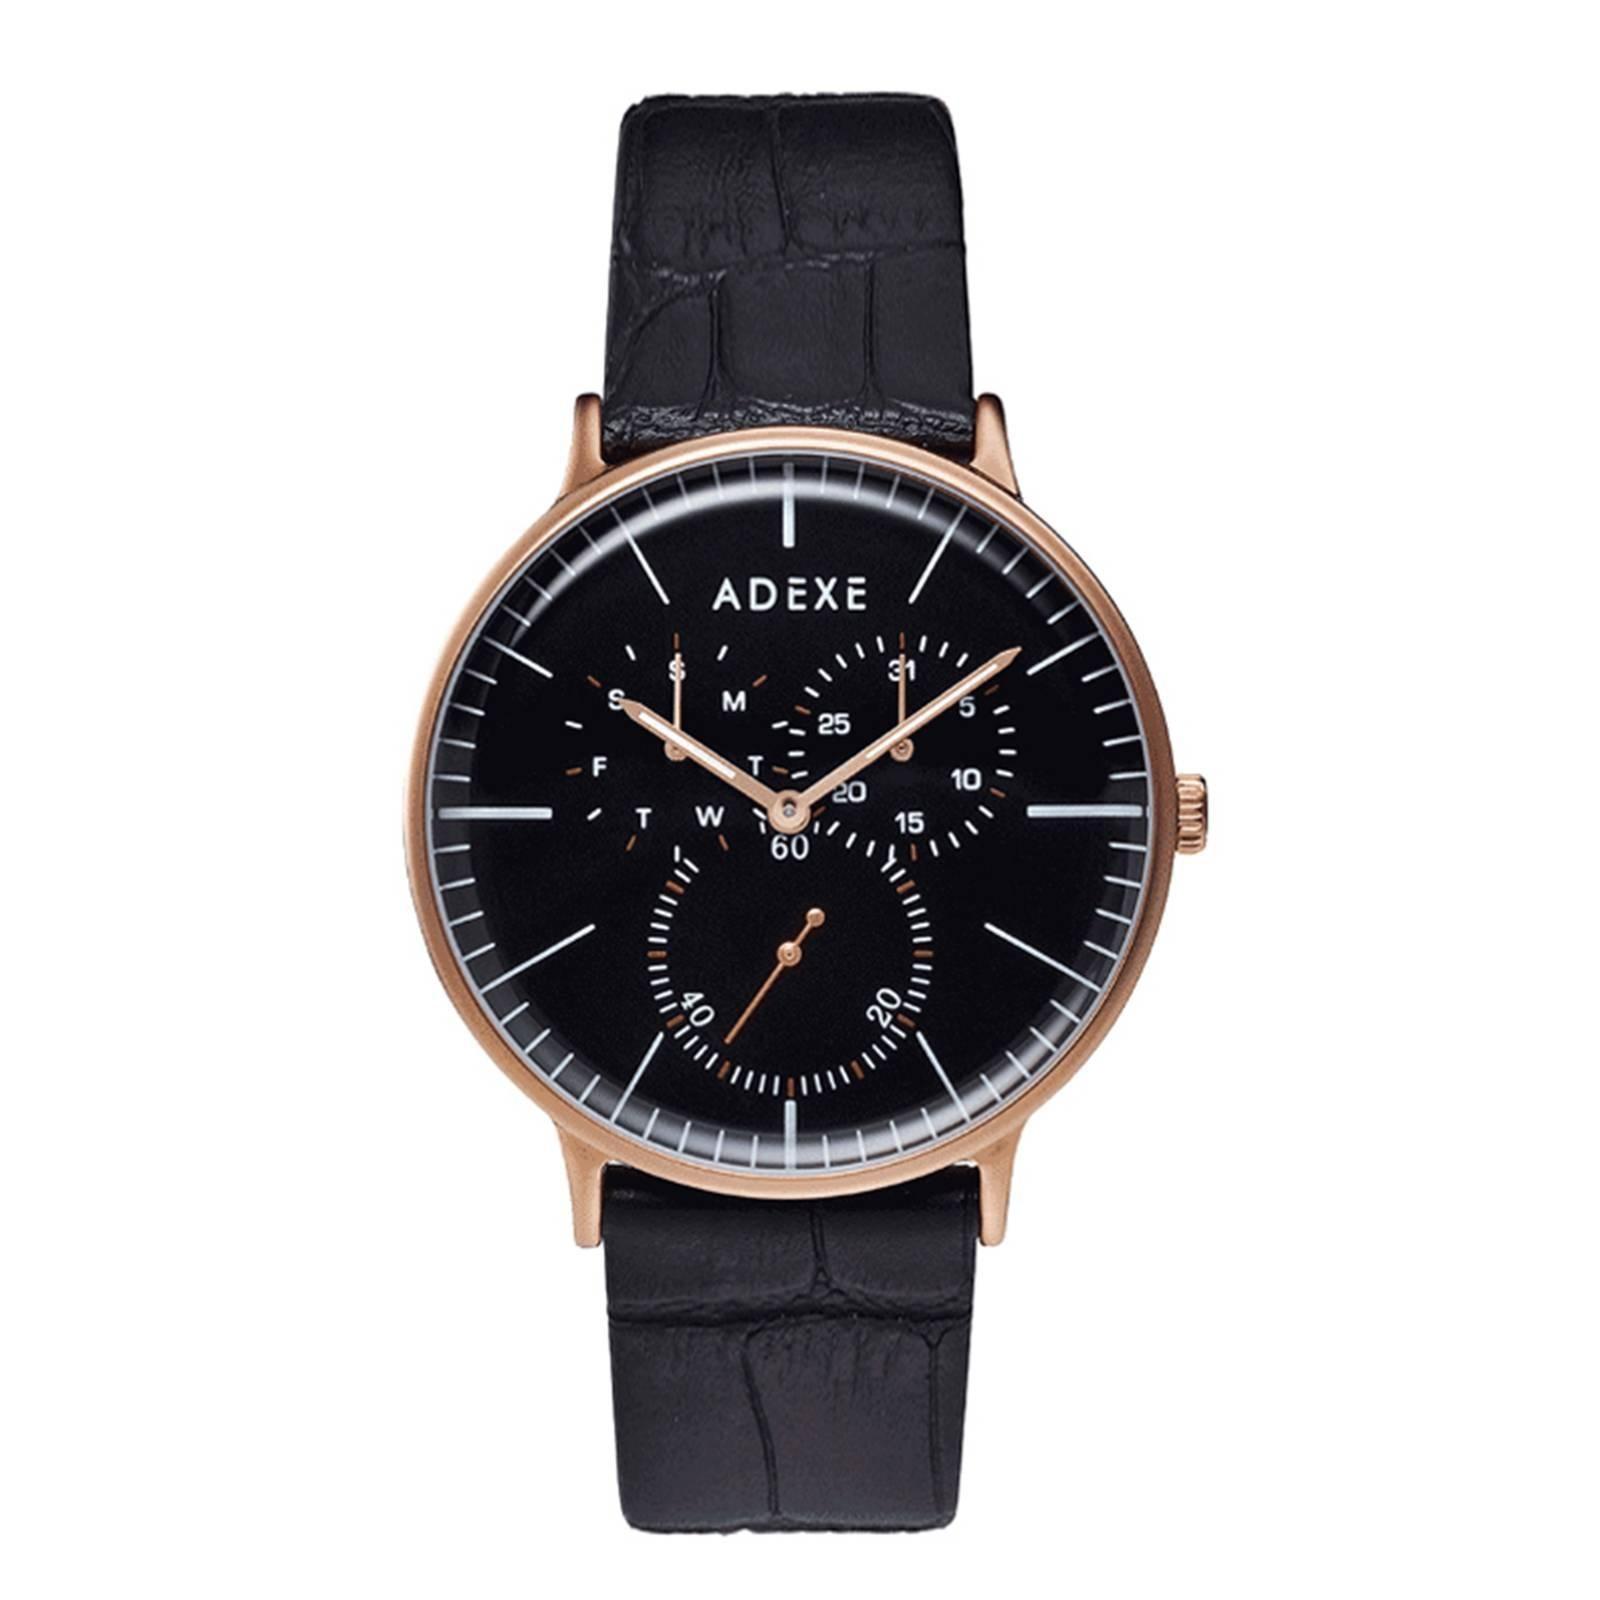  ADEXE Watch THEY Rose gold and Black Elegant Quartz Watch Gift for Him and Her